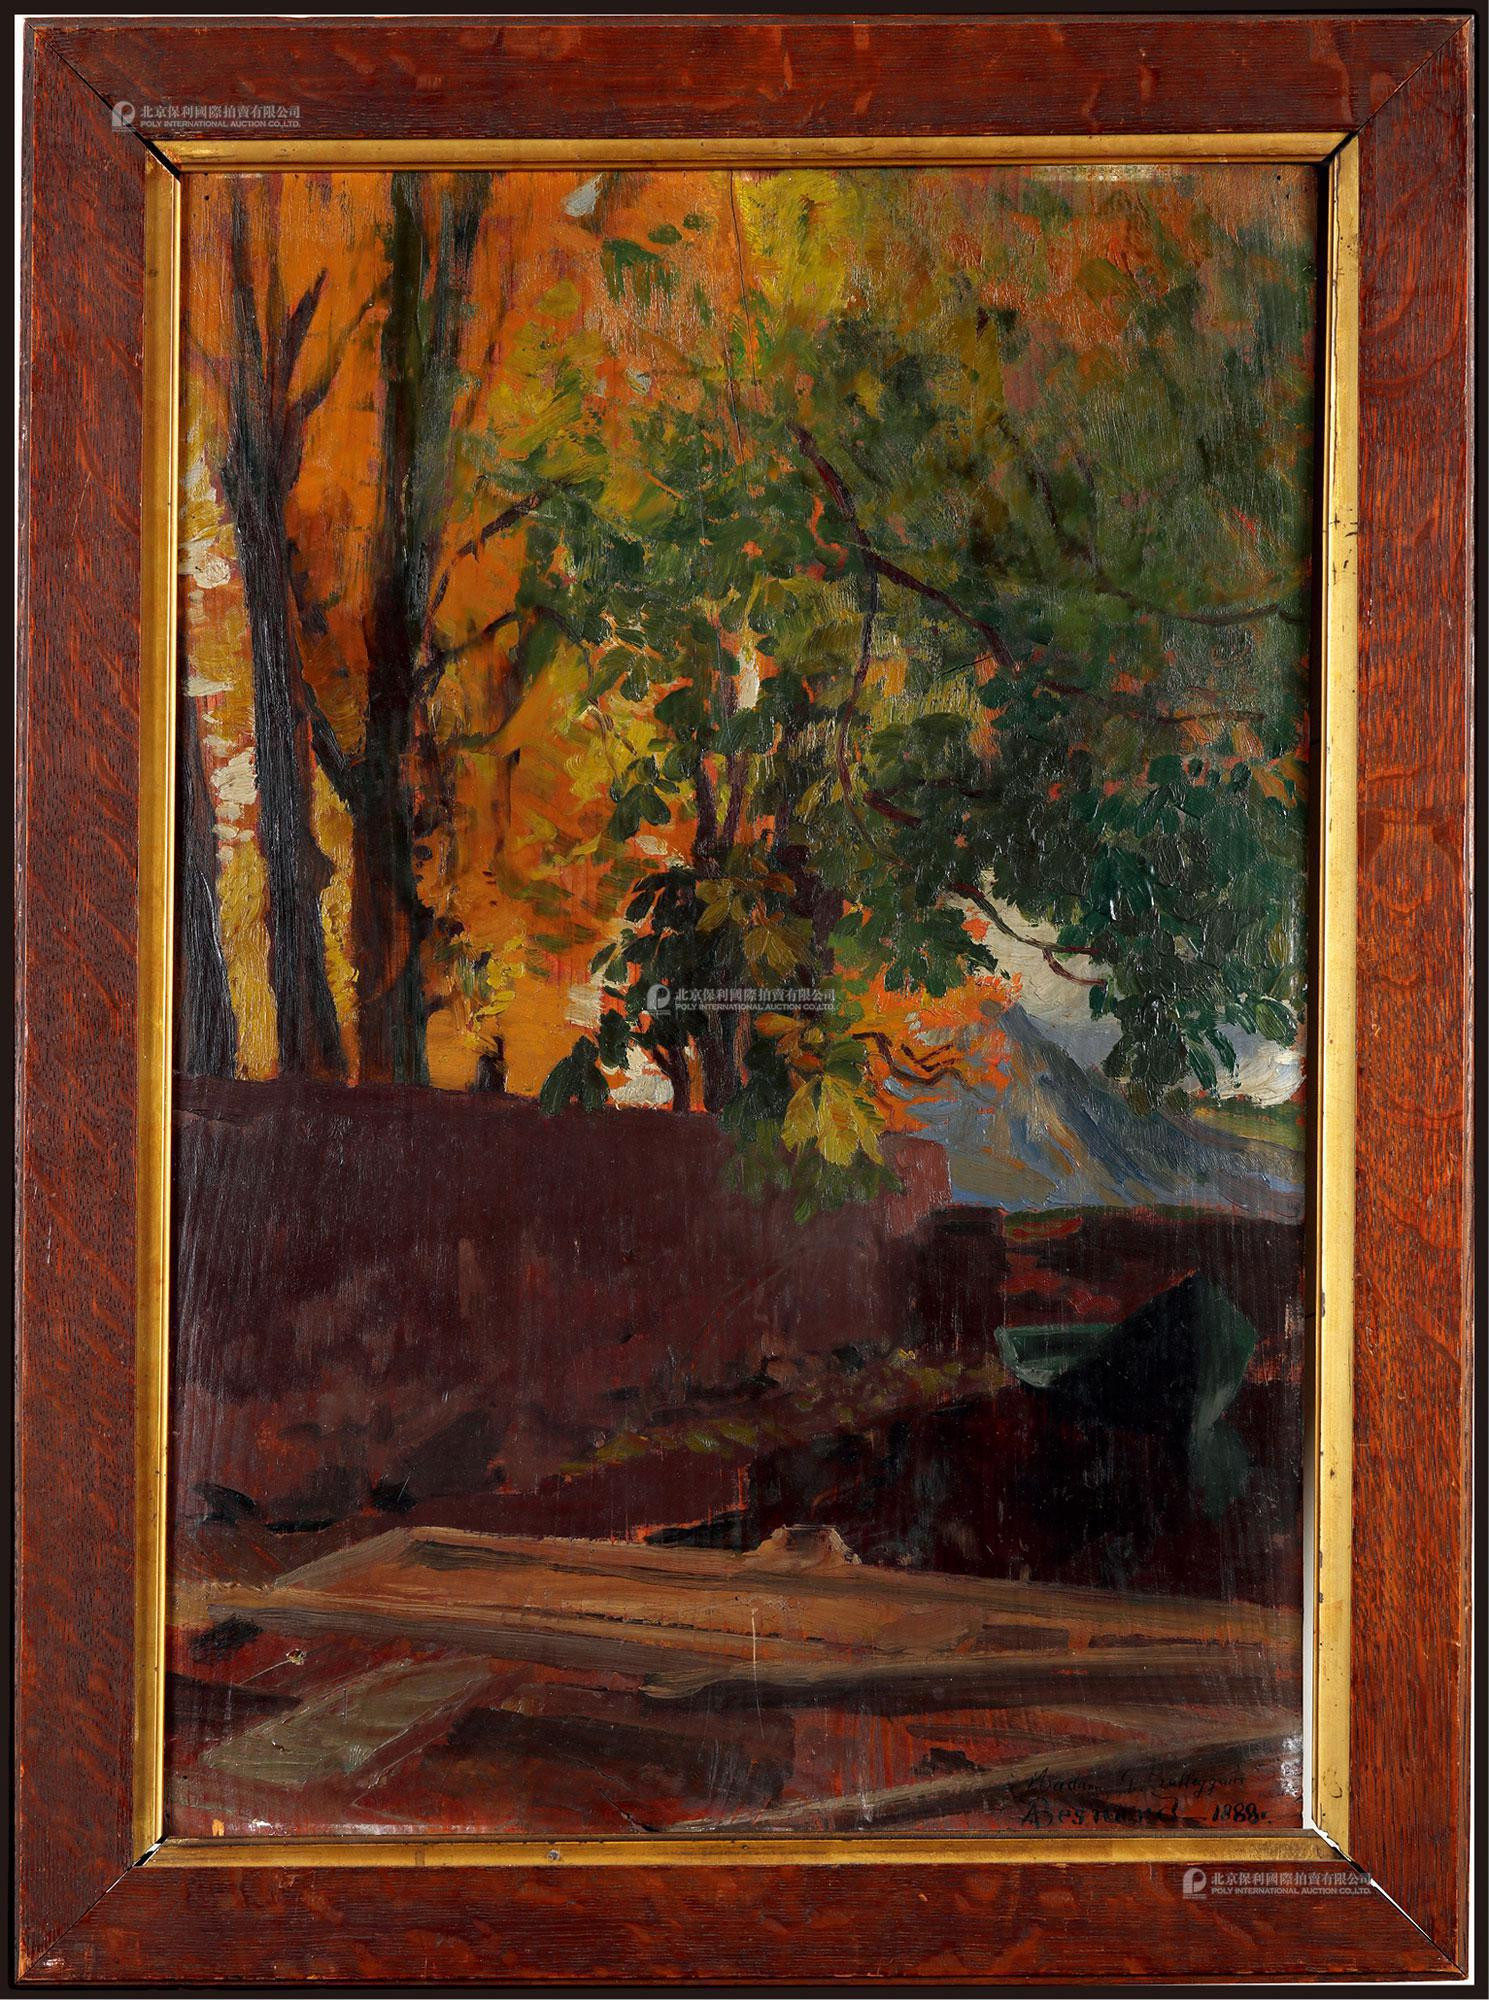 The “Autumn Scene” by Paul Albert Besnard, a famous French painter and mentor of Zao Wou-ki and Xu Beihong, with certificate